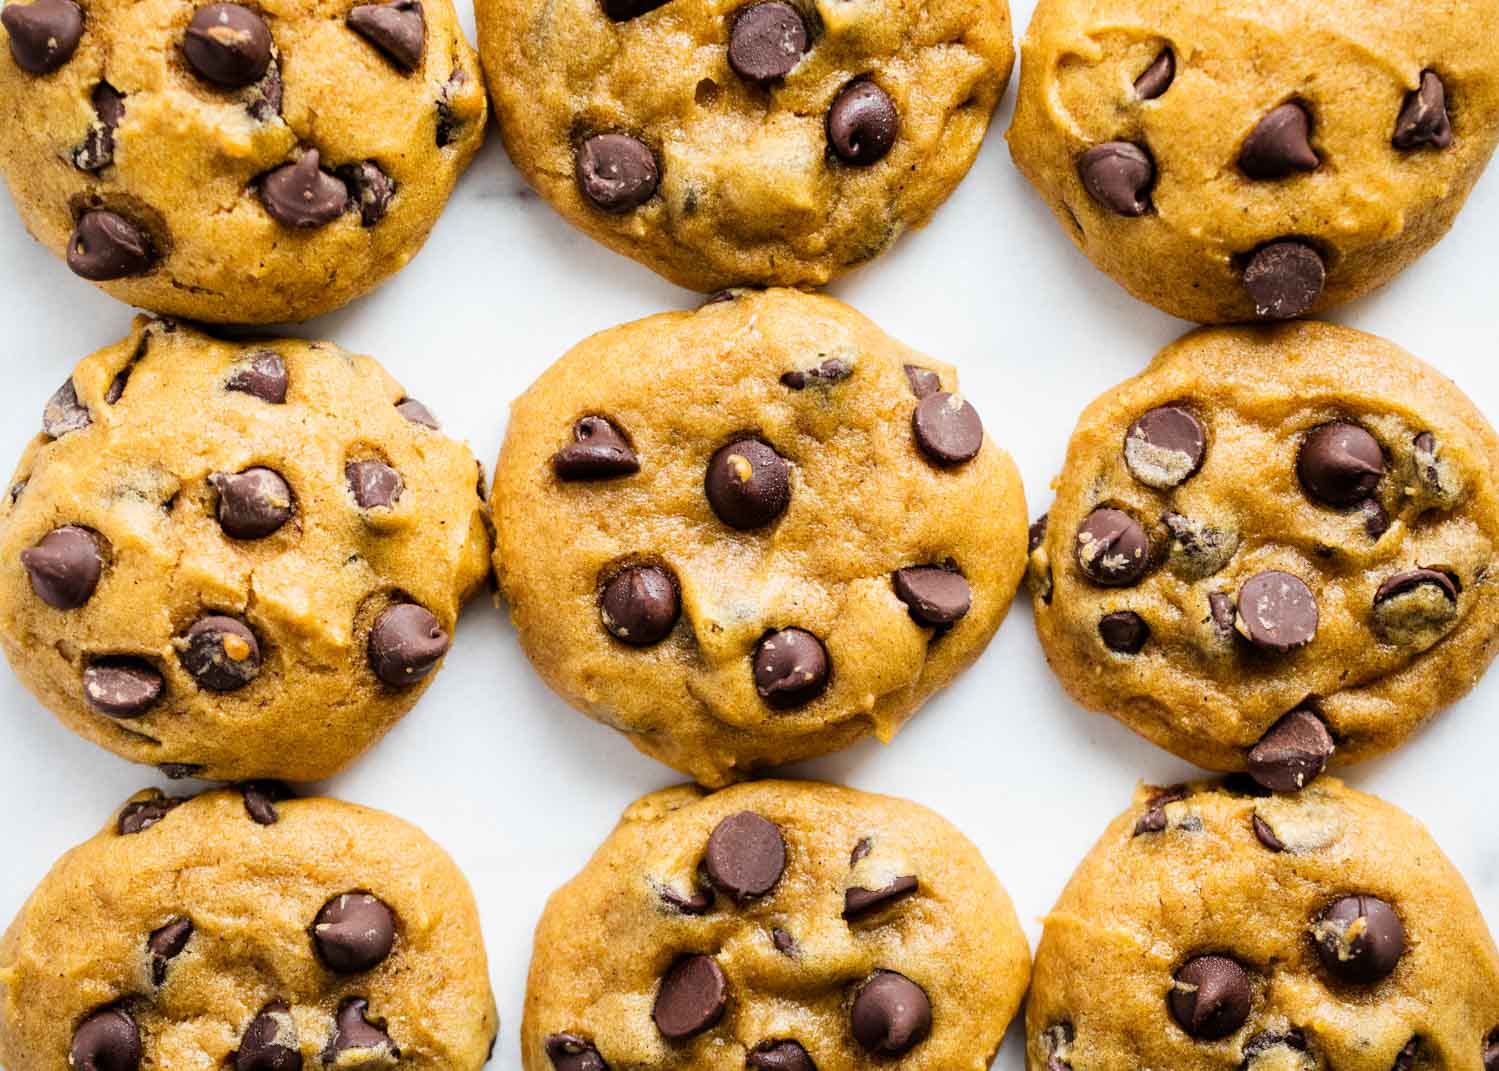 This Crunchy/Chewy Food Test Will Reveal Whether You’re Actually More Logical or Emotional cookies